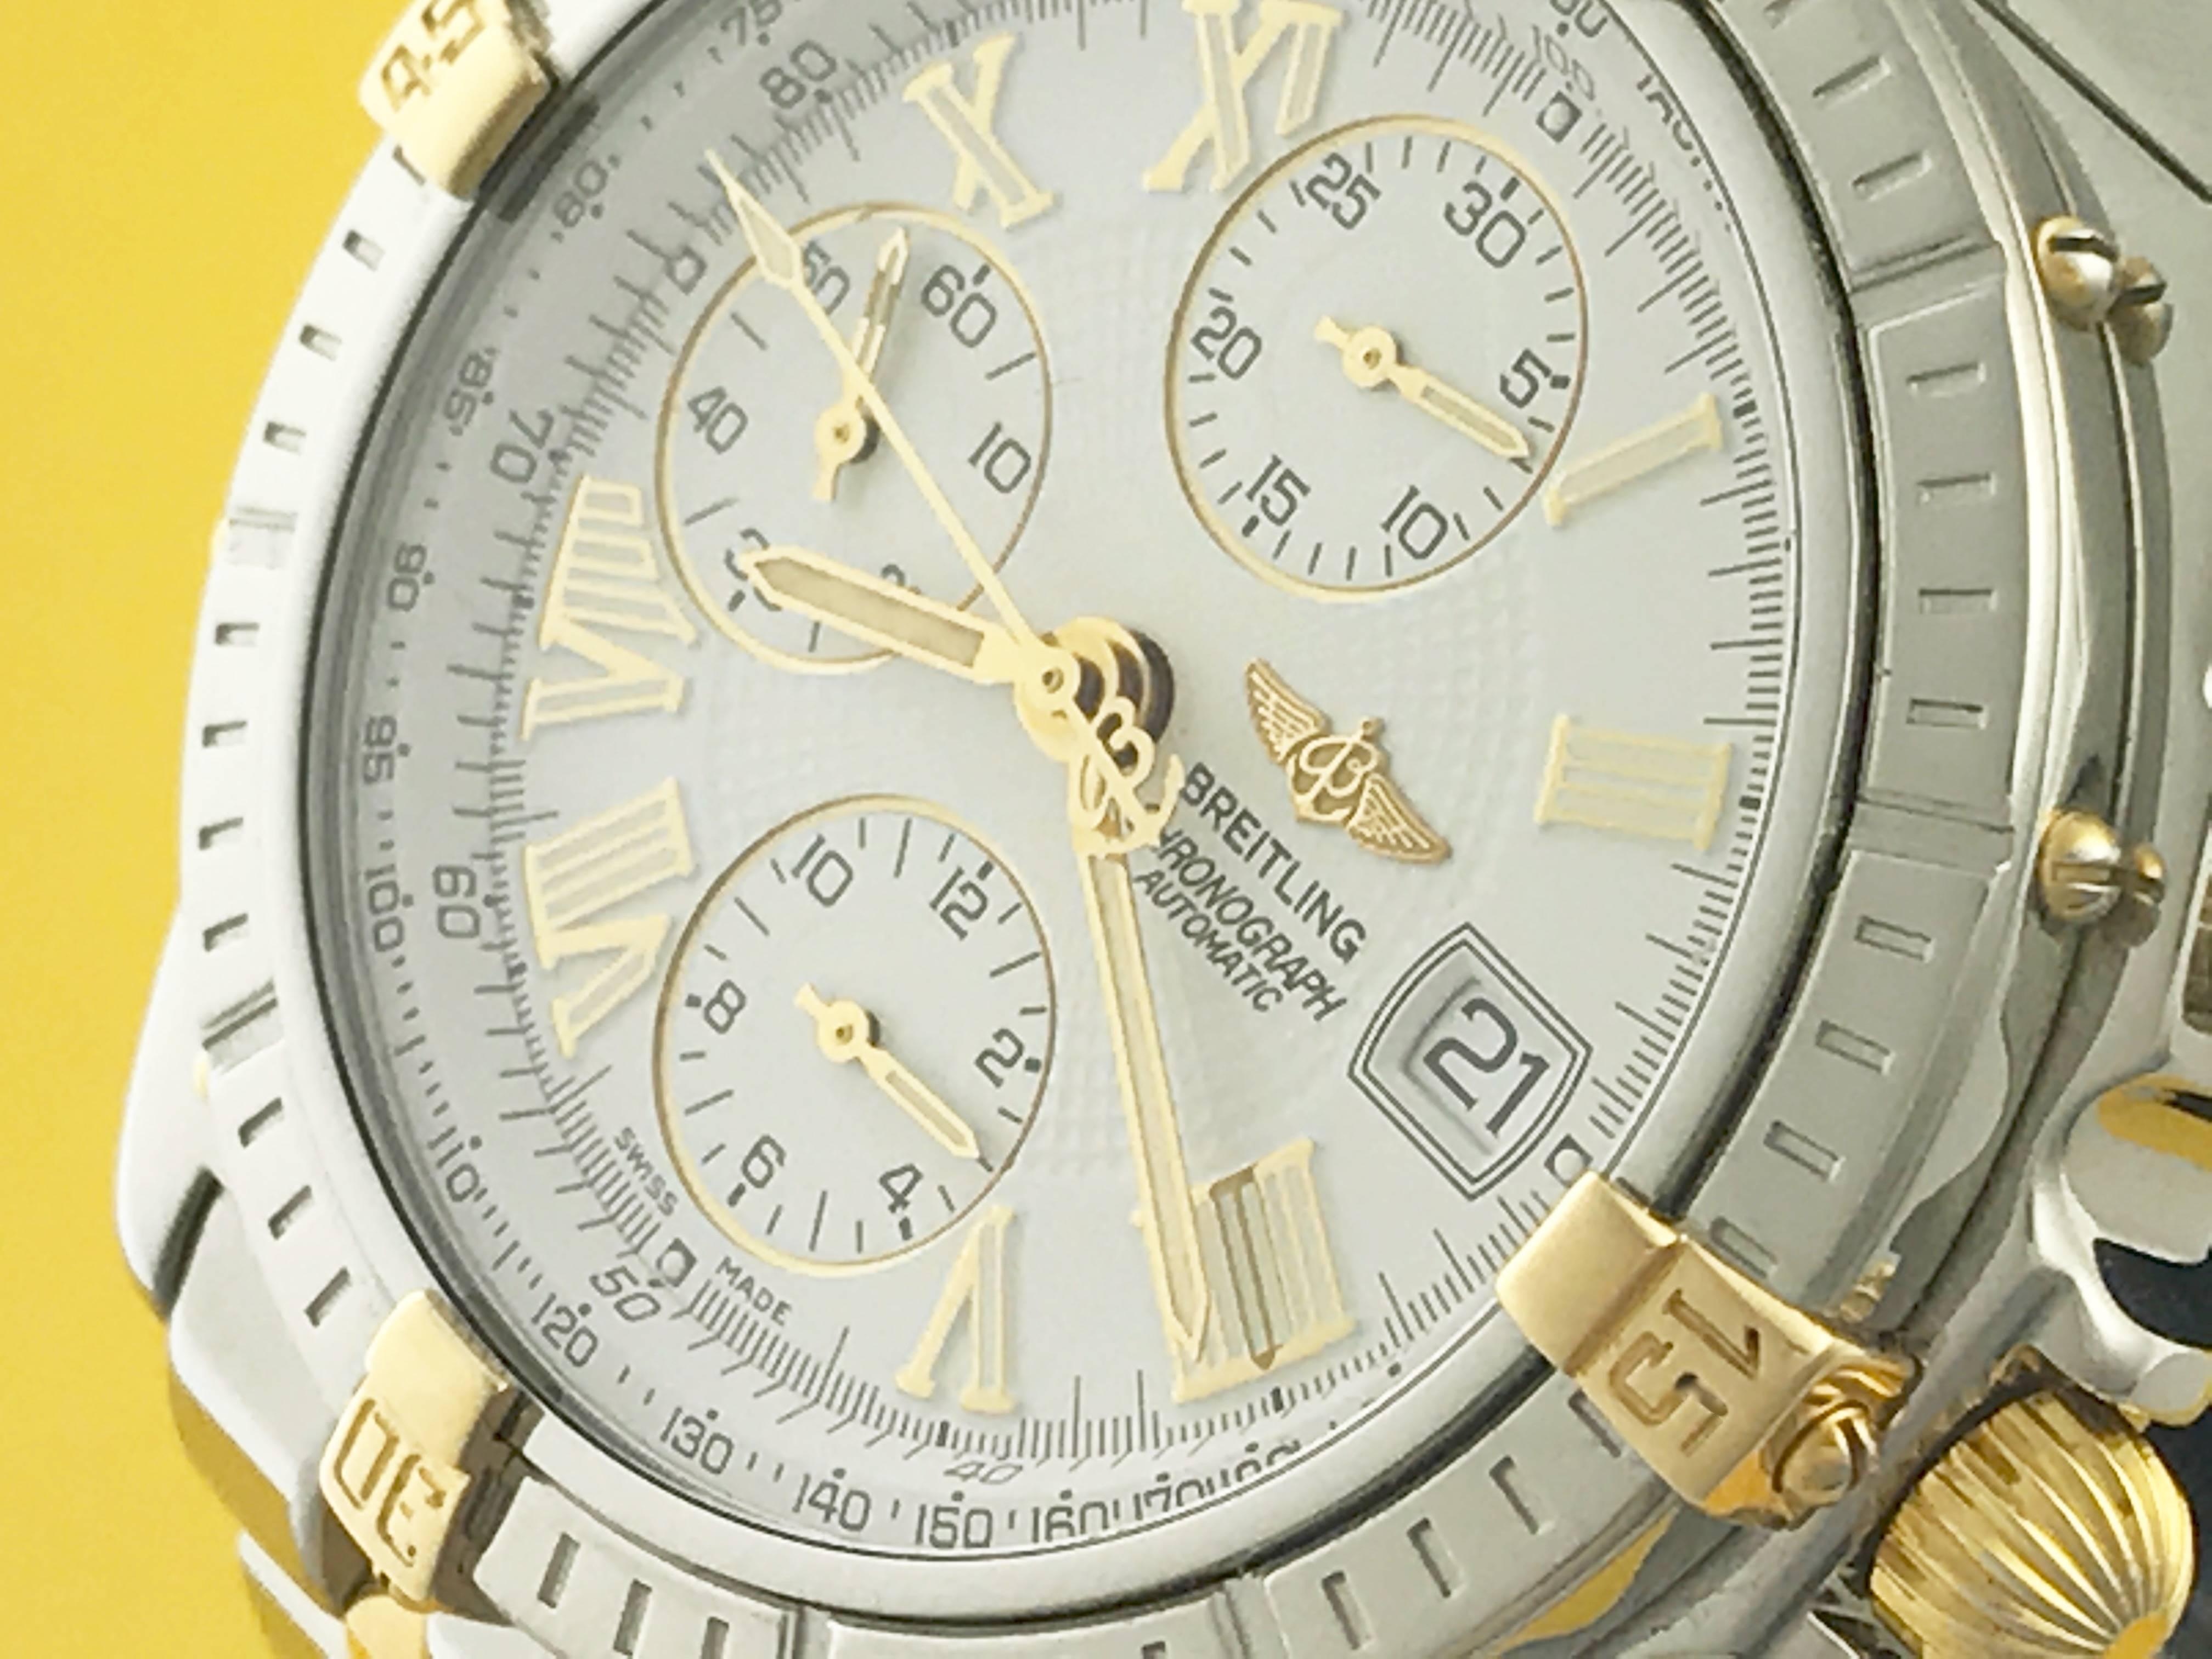 Manufacturer: Breitling
Model Name: Crosswind
Model Num: B13055
Condition: Pre Owned
Watch Category: Contemporary
Gender: Mens
Movement Comment: Chronograph
Movement: Automatic Winding with Date
Dial: White guilloche Dial with gold and luminous